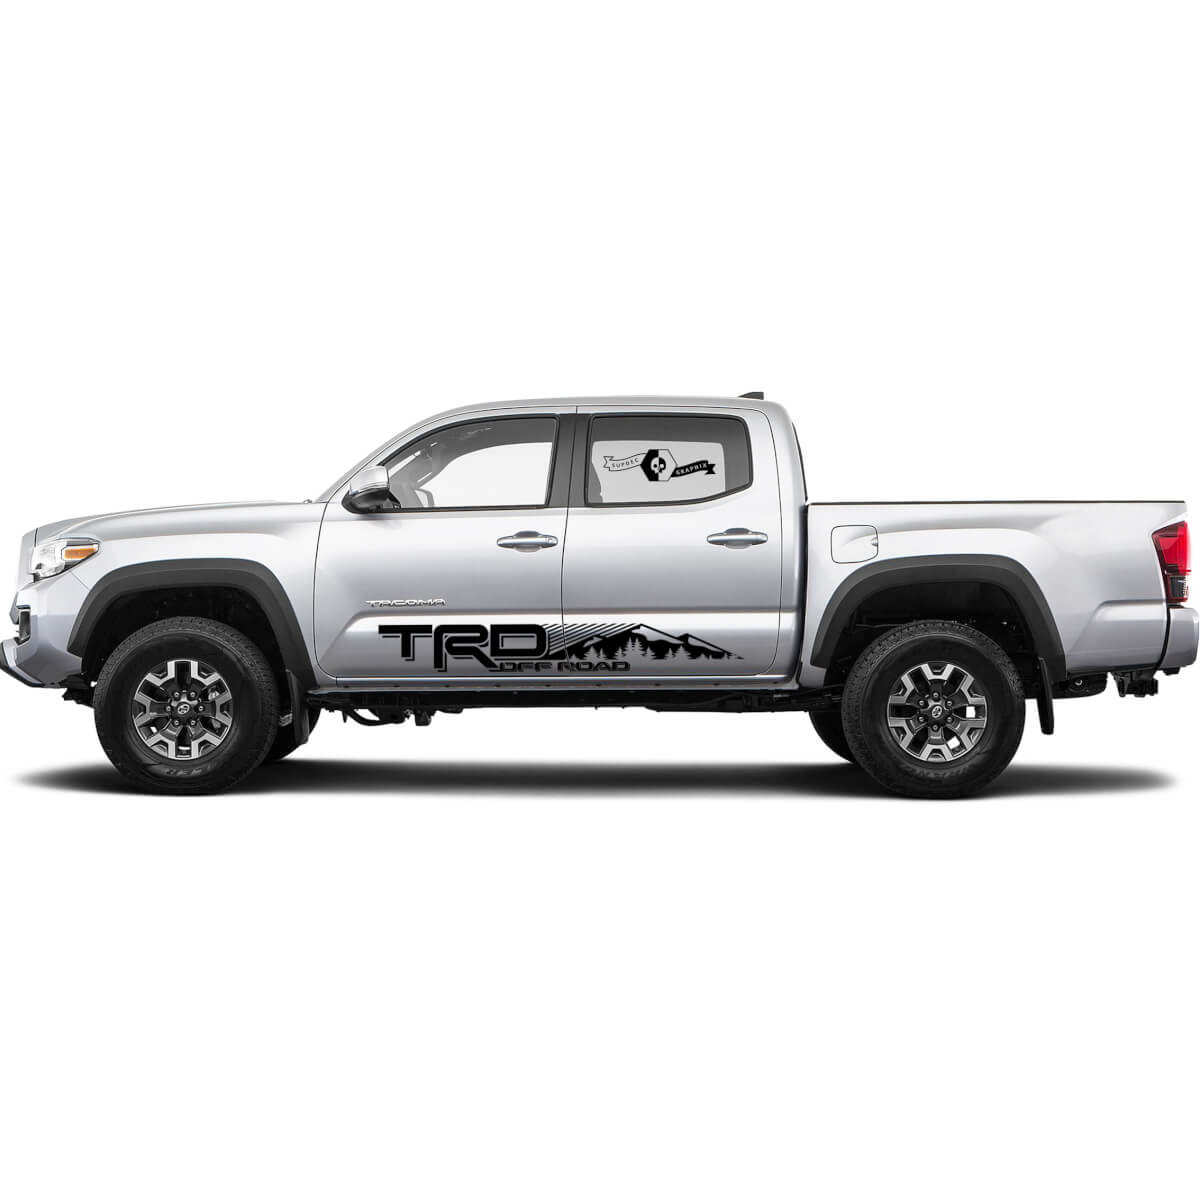 TRD Racing Development Forest Mountains style Rocker Panel Decals Stickers for Toyota Tacoma Tundra FJ Cruiser 4Runner